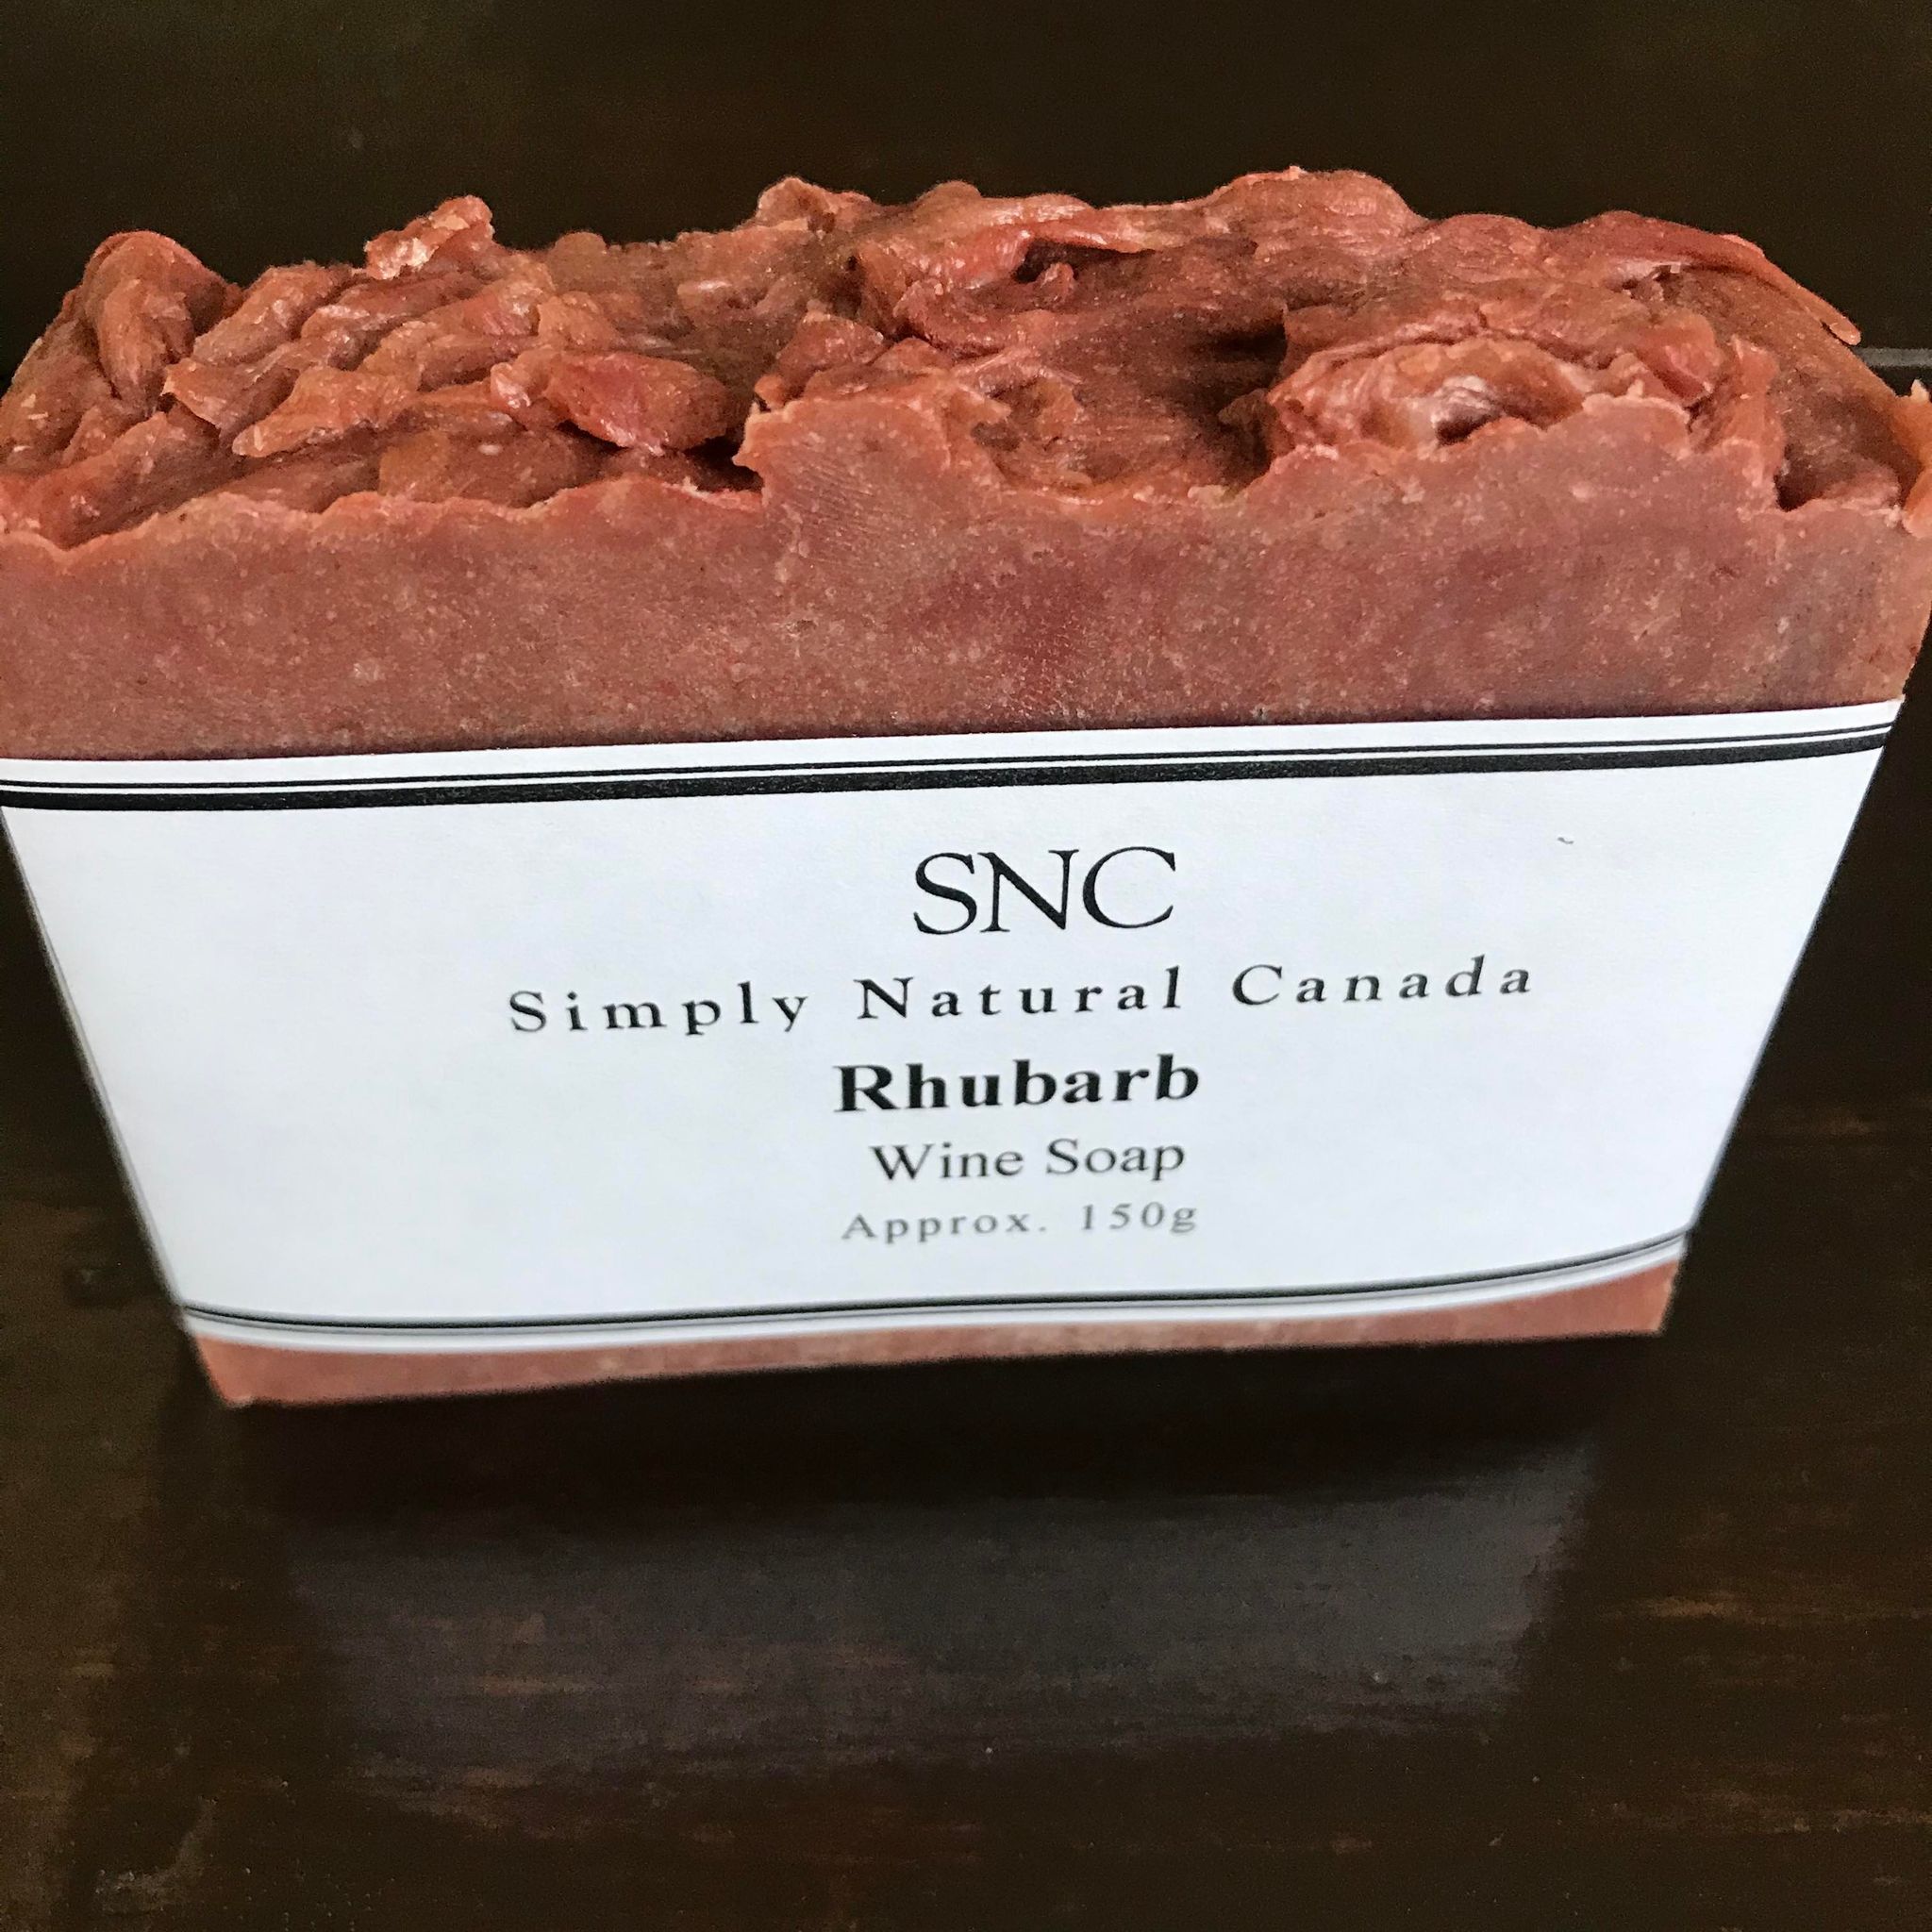 Rhubarb vegan wine soap 150 g made in Canada in small batches with local fruit wine by Simply Natural Canada 